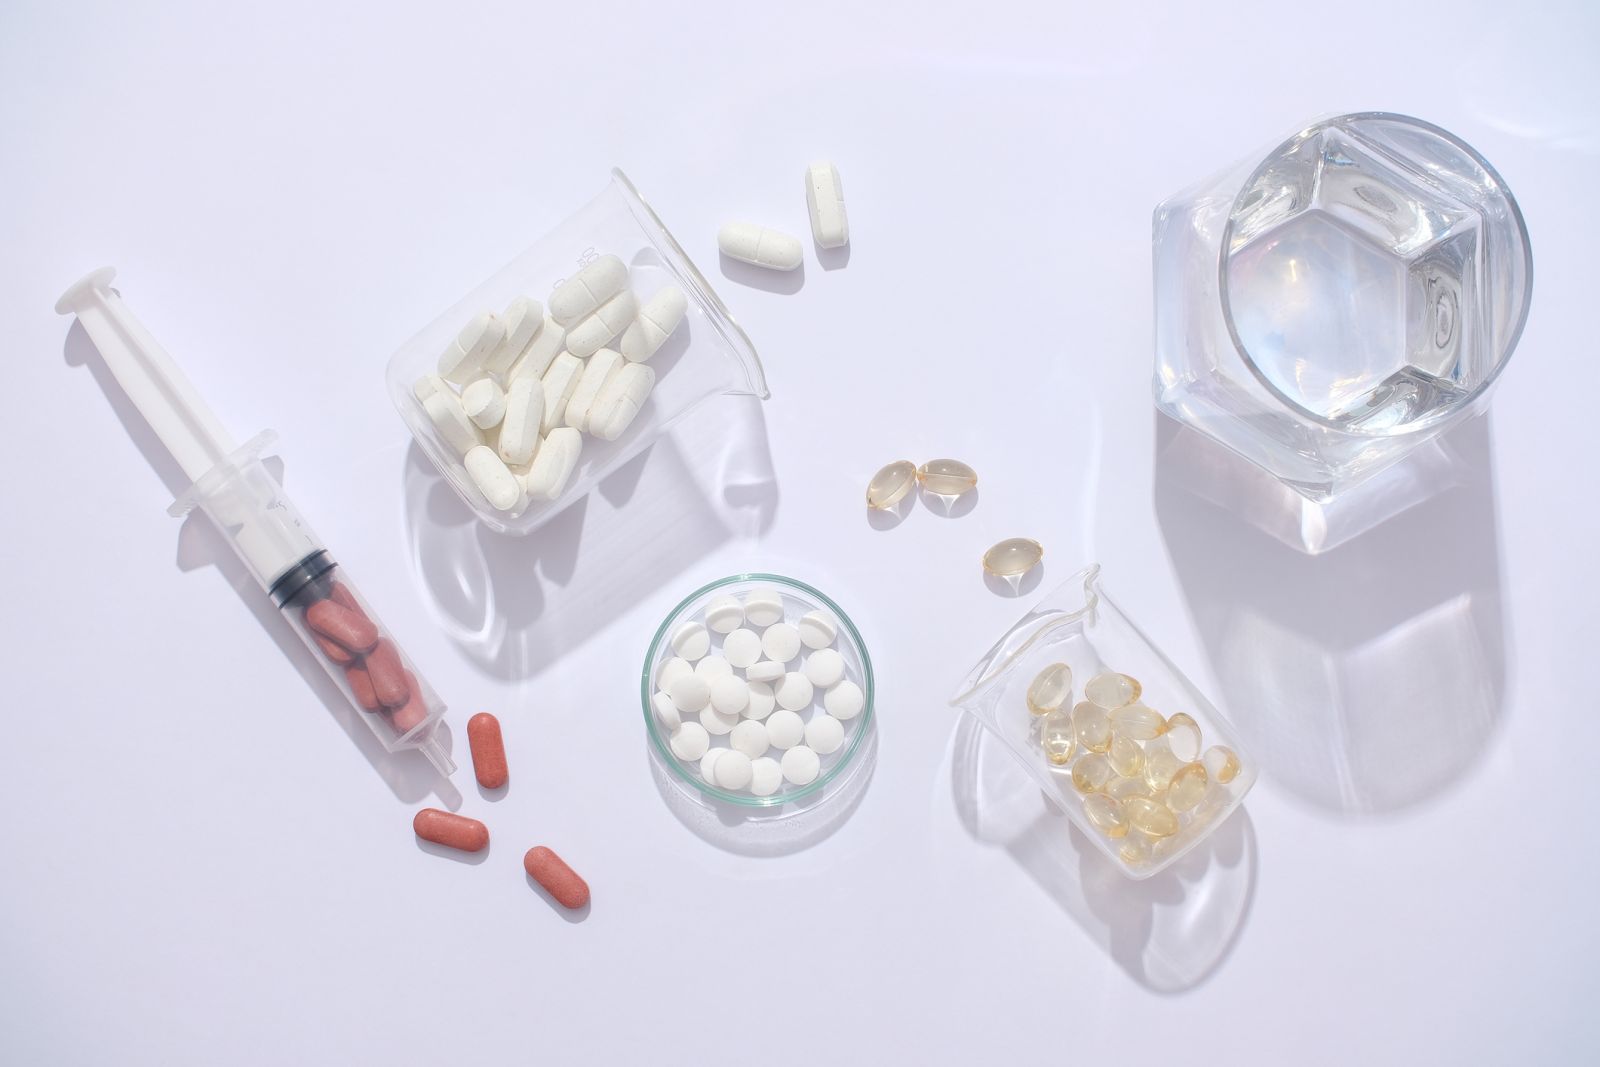 Healthcare - pills in a petri dish and syringe by LightStock via iStock